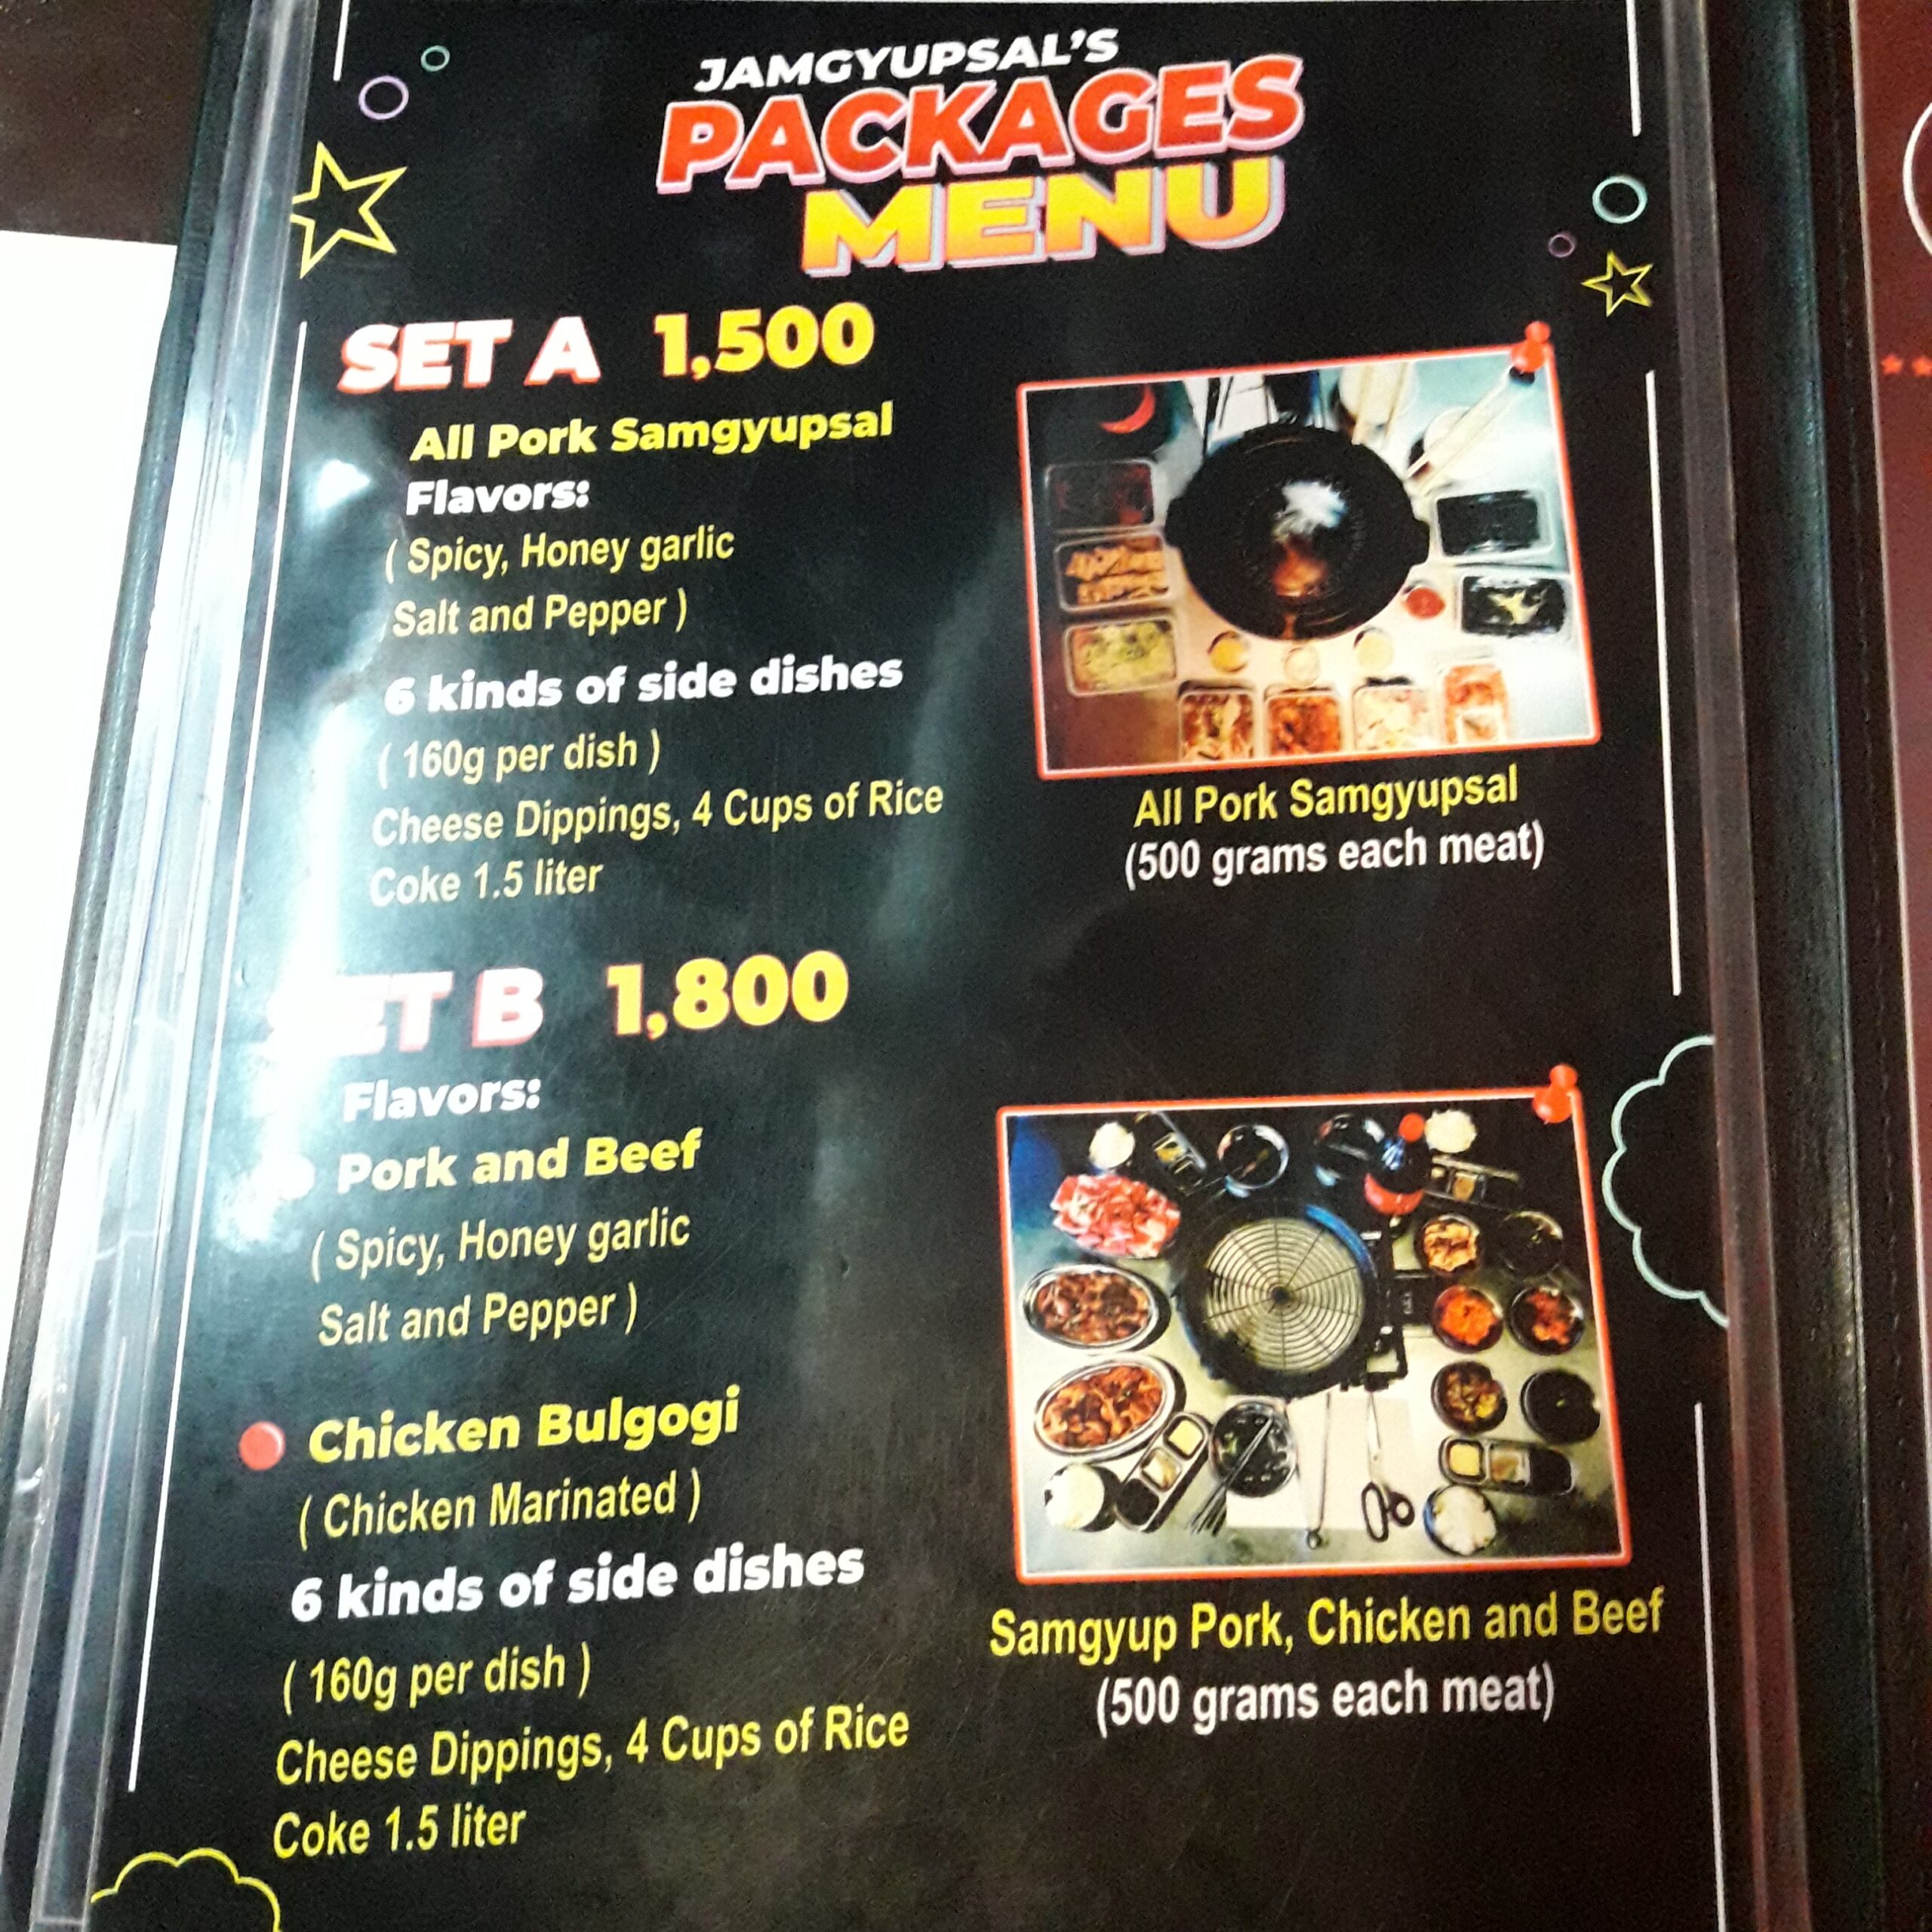 Jamgyupsal packages